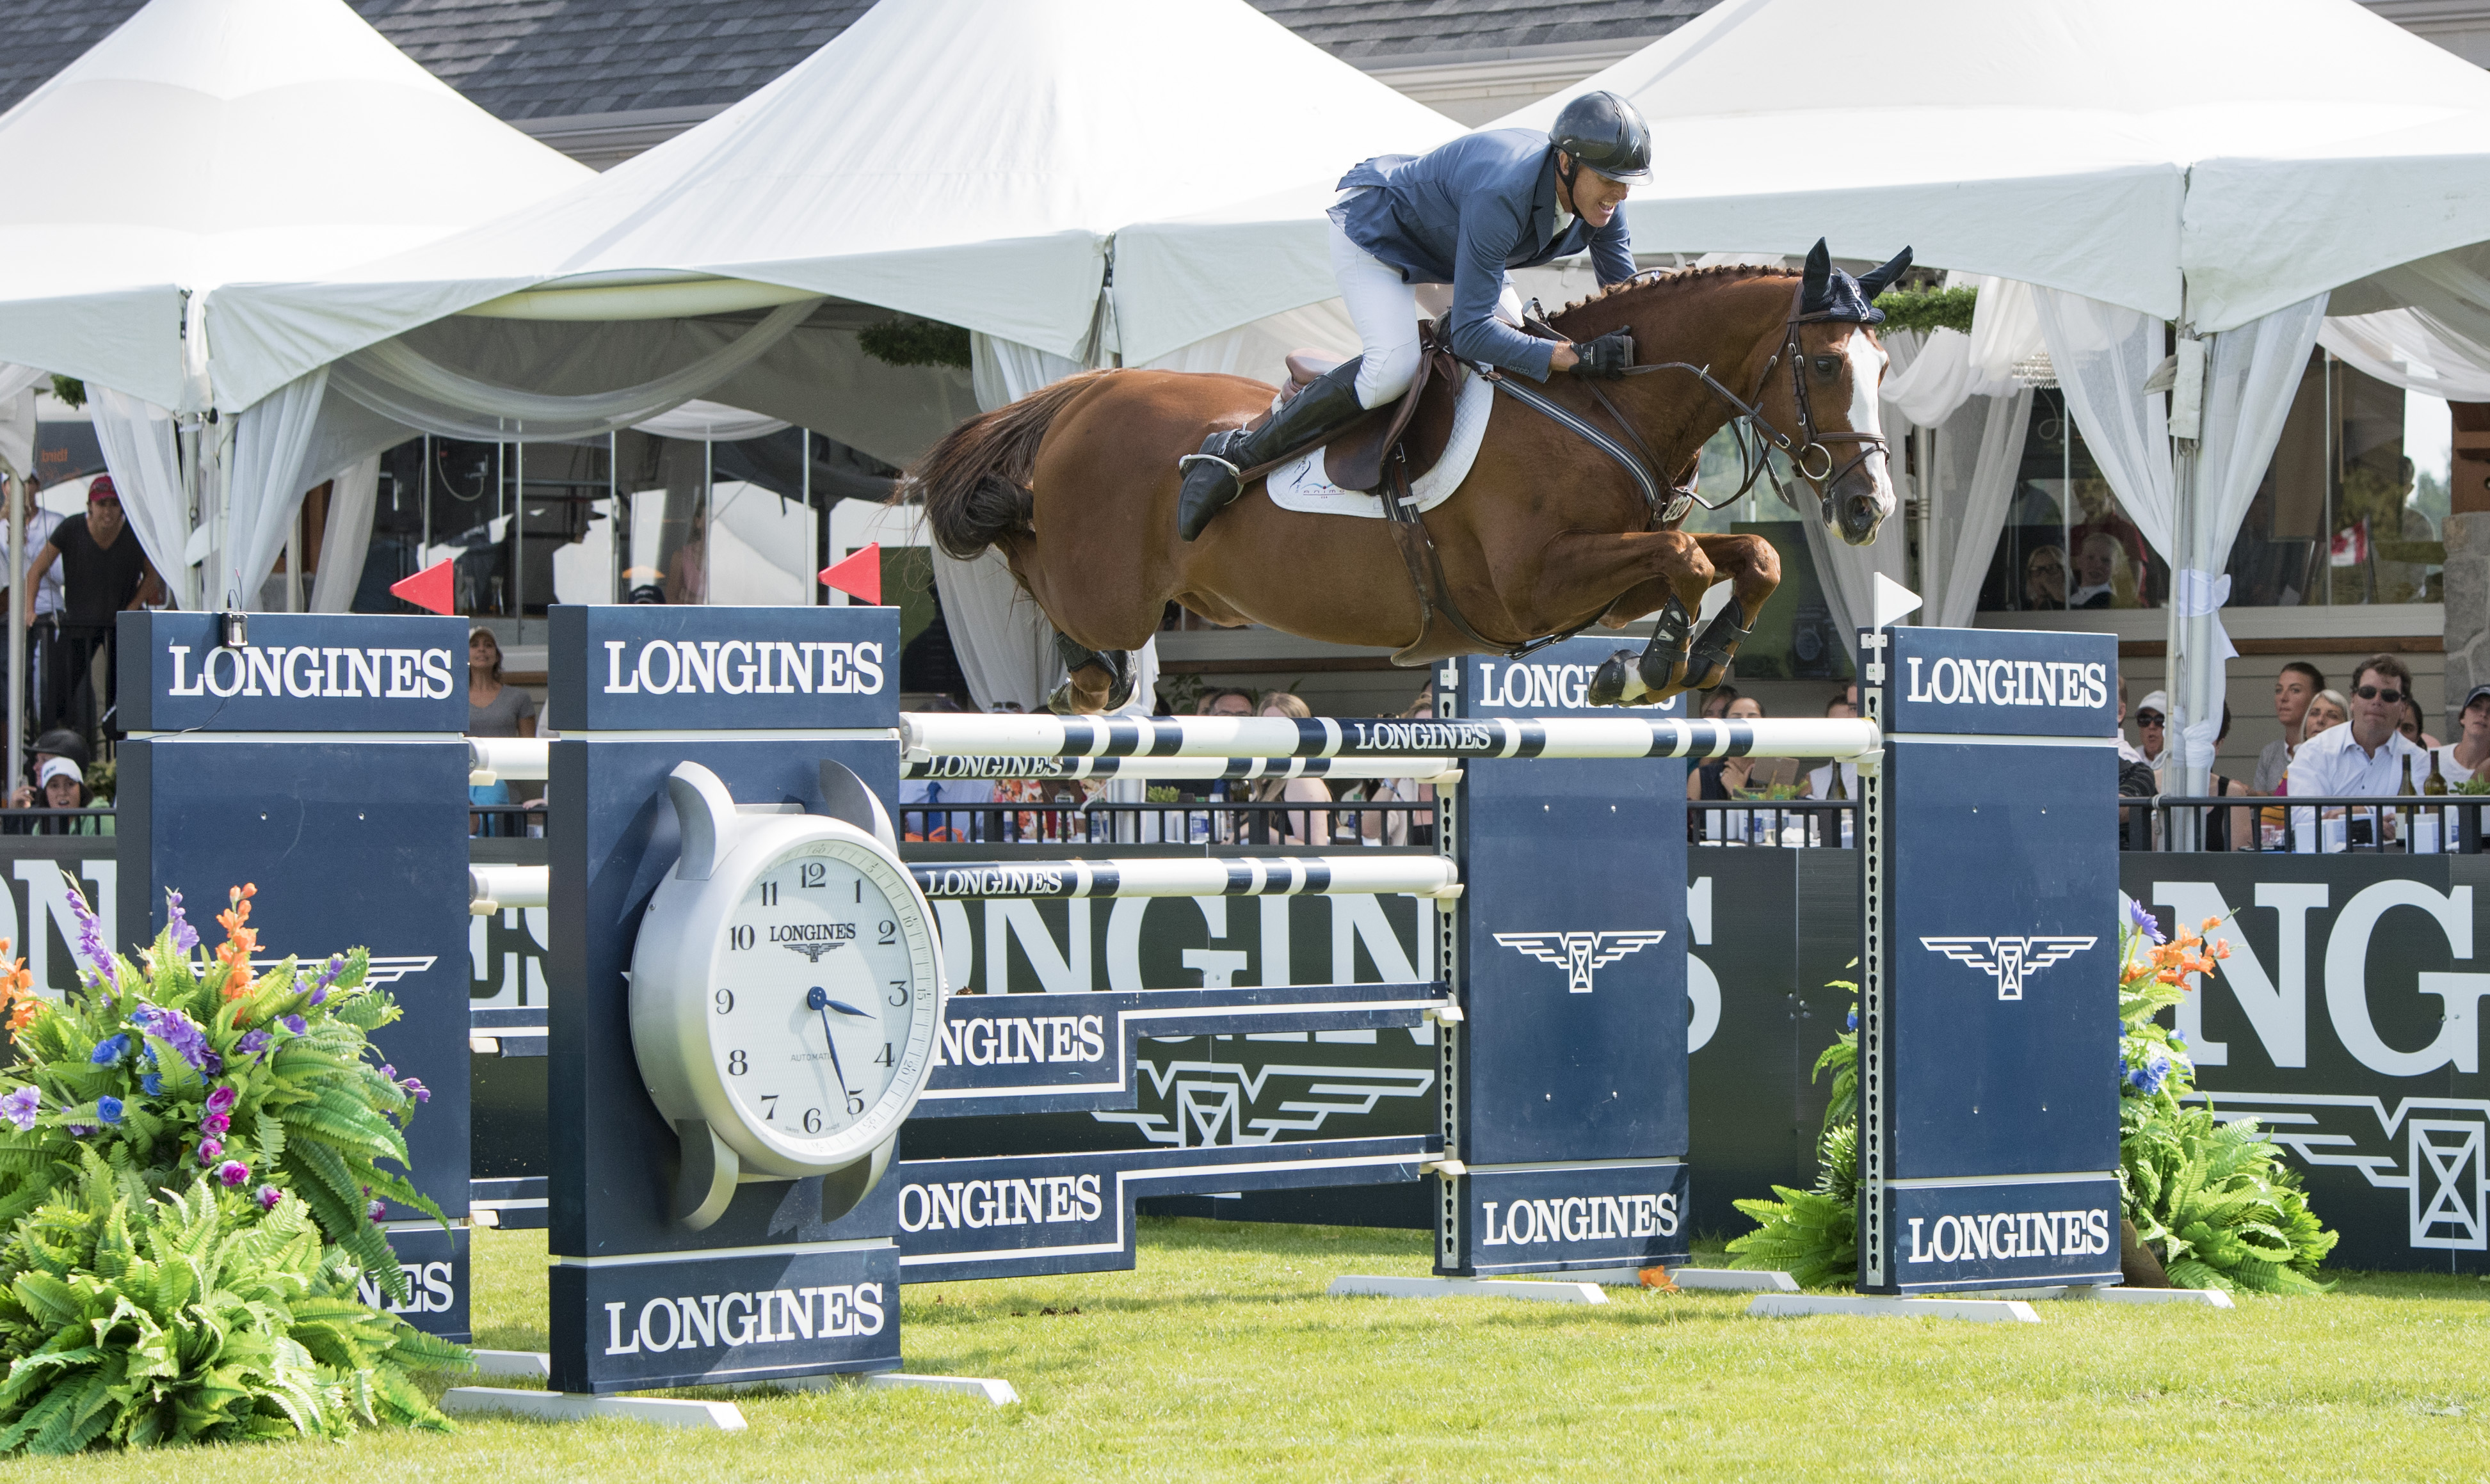 Richard Fellers (USA) and Flexible wins the Longines FEI World Cup™ Jumping North American League, at Thunderbird Show Park, in Langley B.C. Canada, August 16, 2015. Pic Rebecca Berry